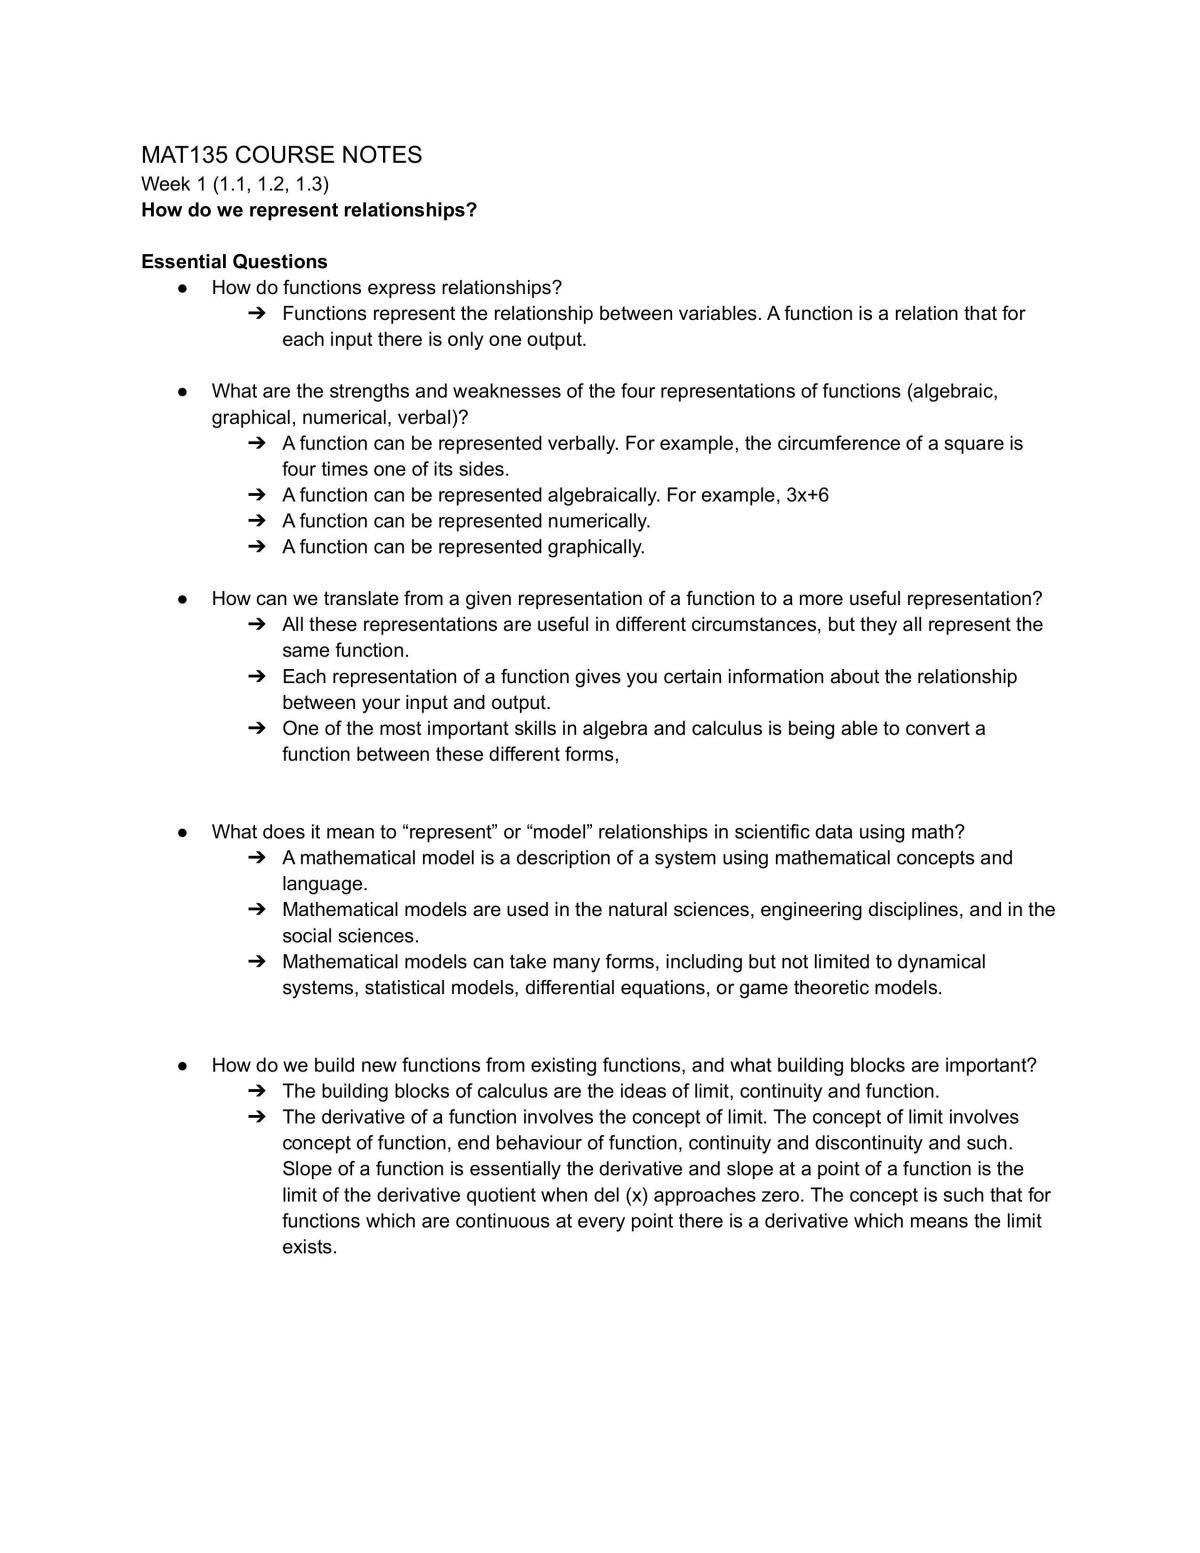 MAT135 Complete Course Notes - Page 1